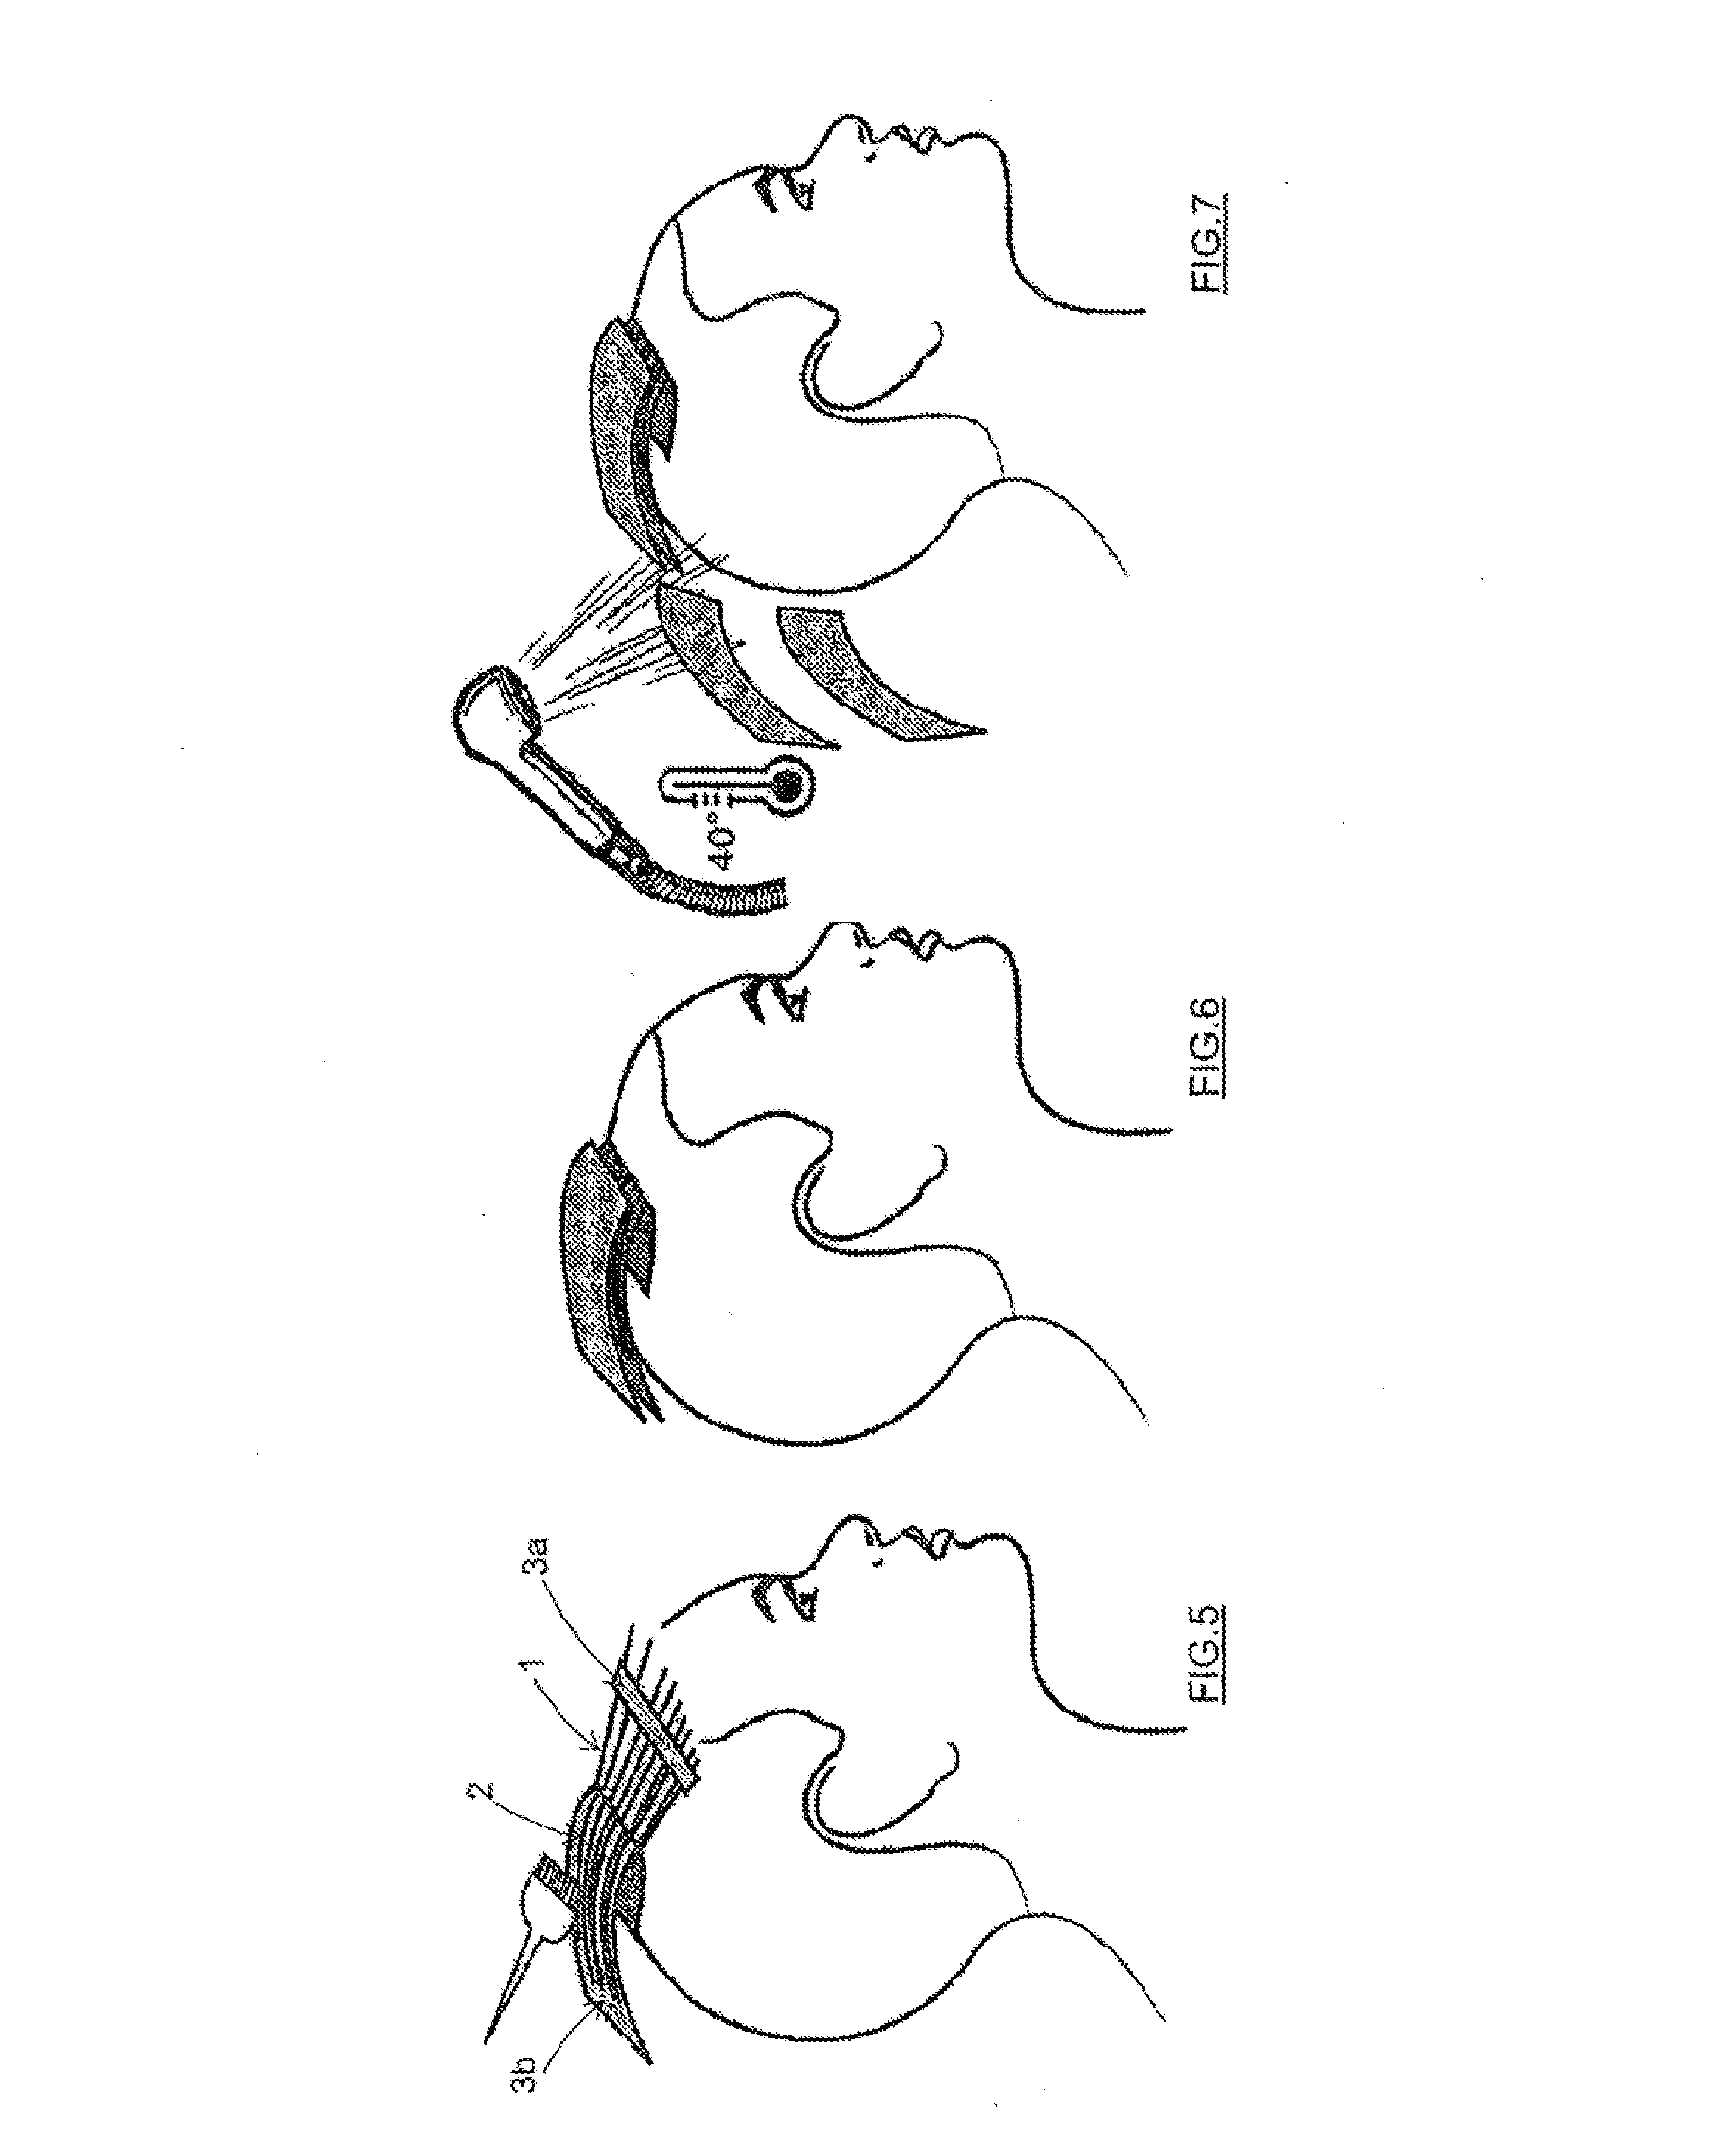 Method for dyeing/bleaching hair and relative applicator tool